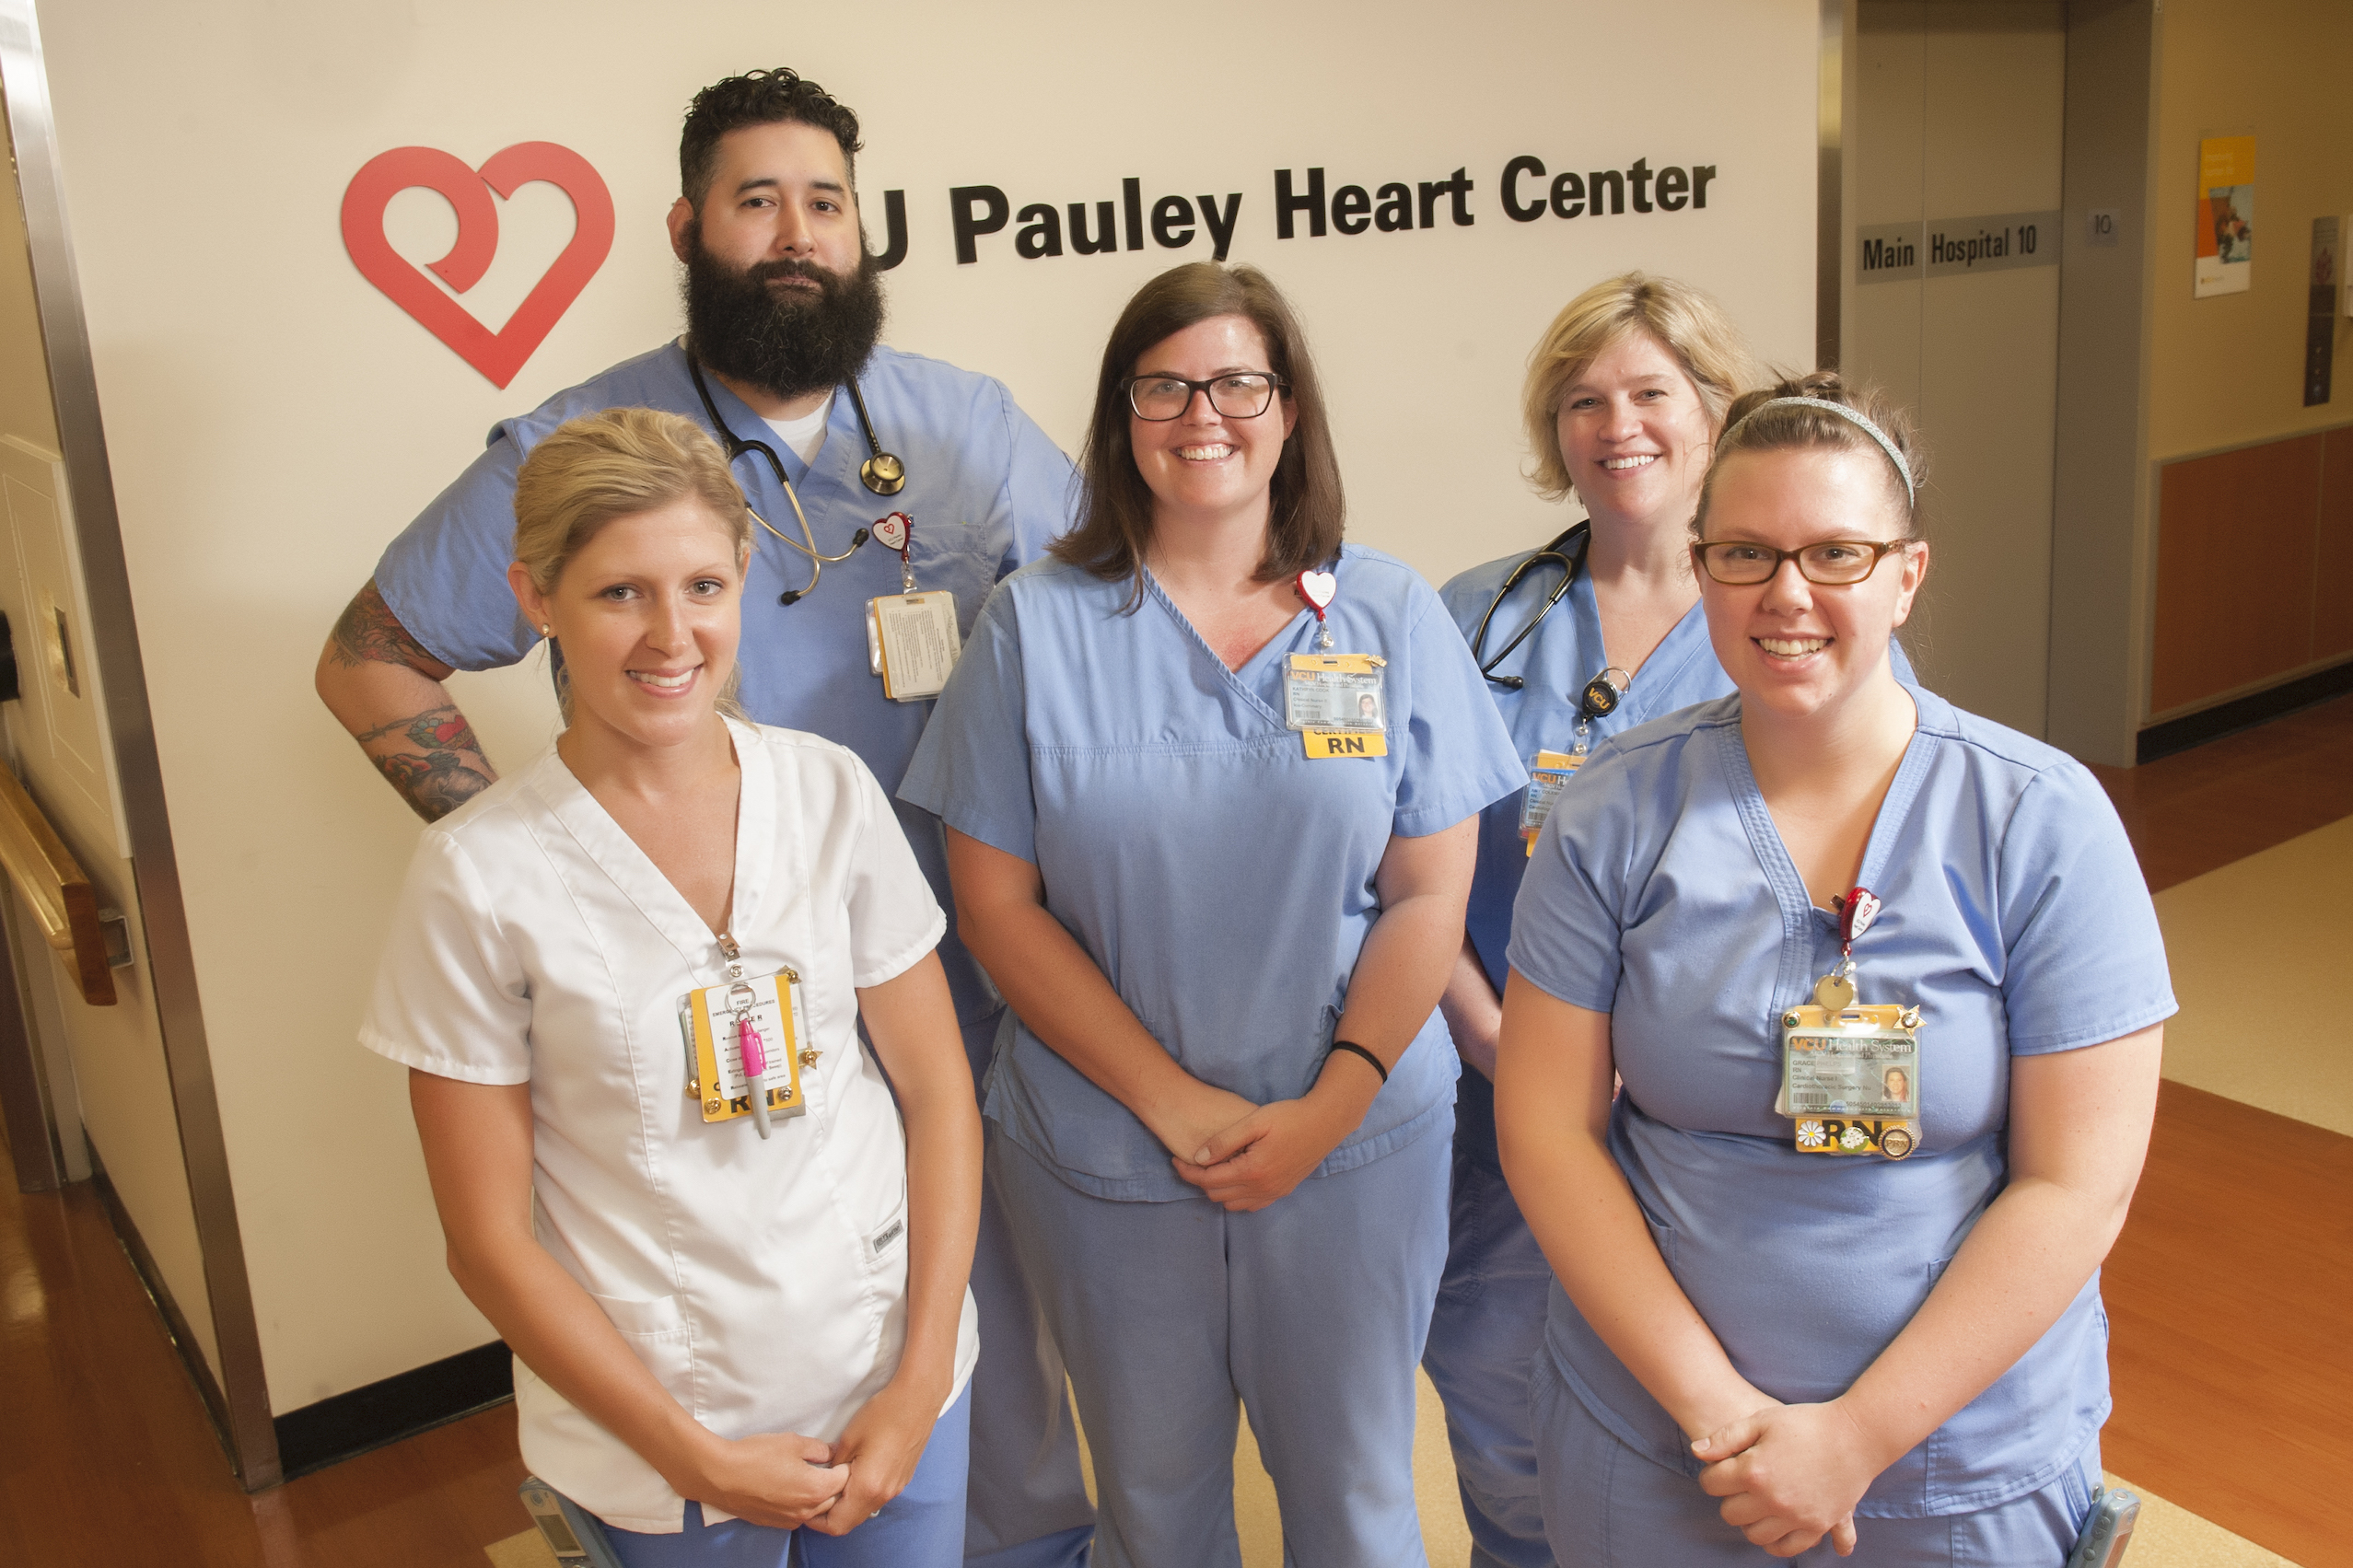 In recognition of a $5 million gift by the Pauley Family Foundation in 2006, VCU's heart center was named the VCU Health Pauley Heart Center. (Tom Kojcsich, University Marketing)